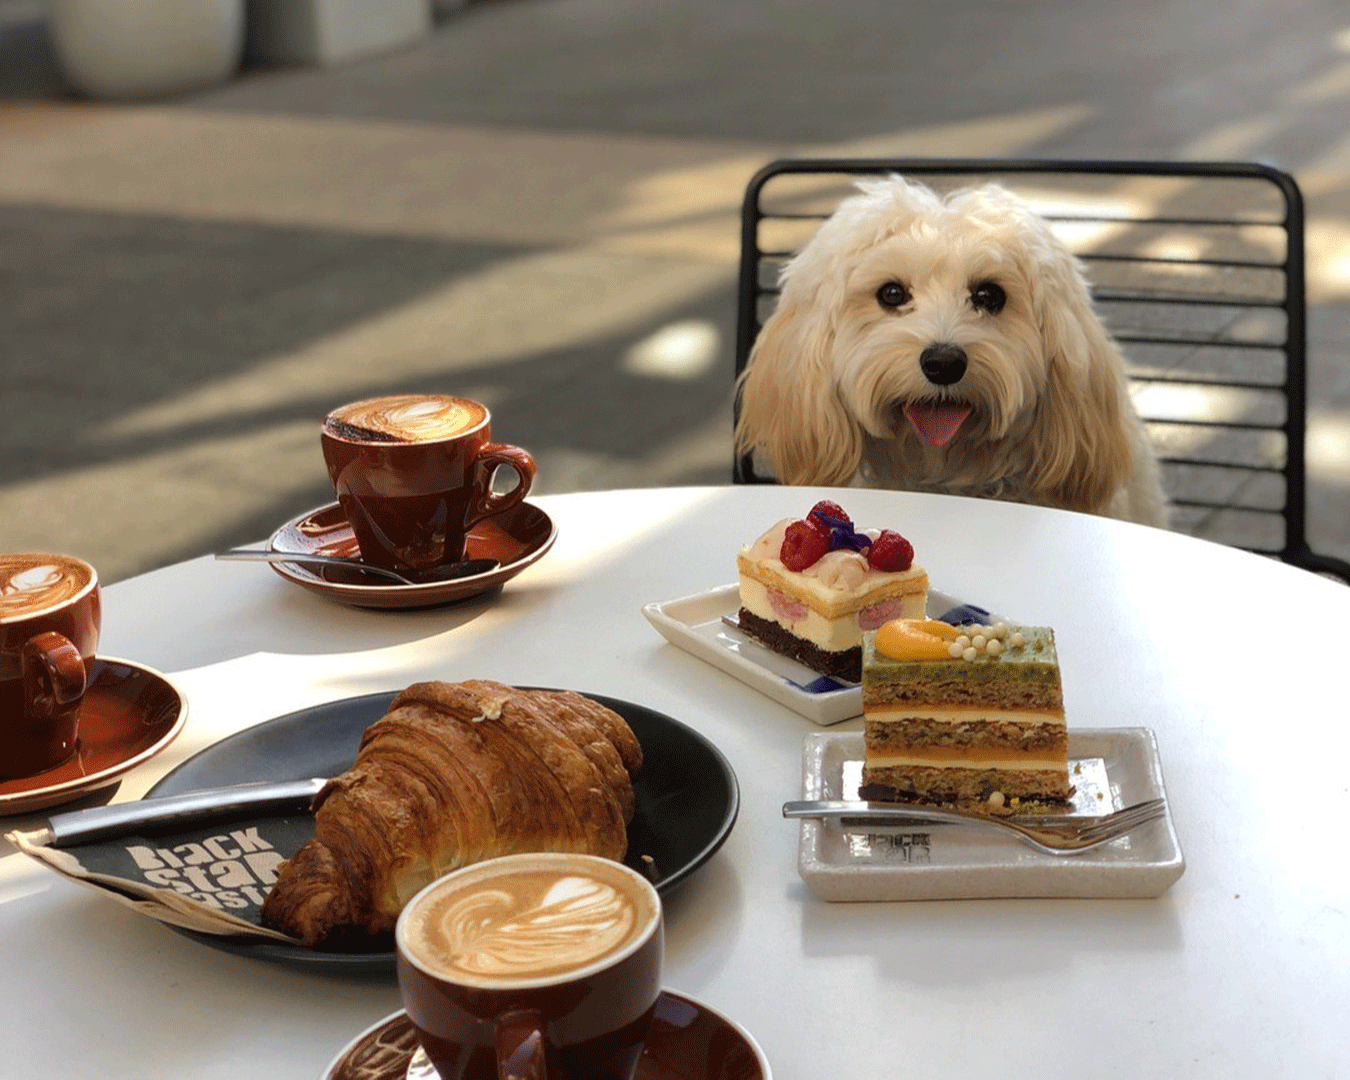 Dog at table with pastries